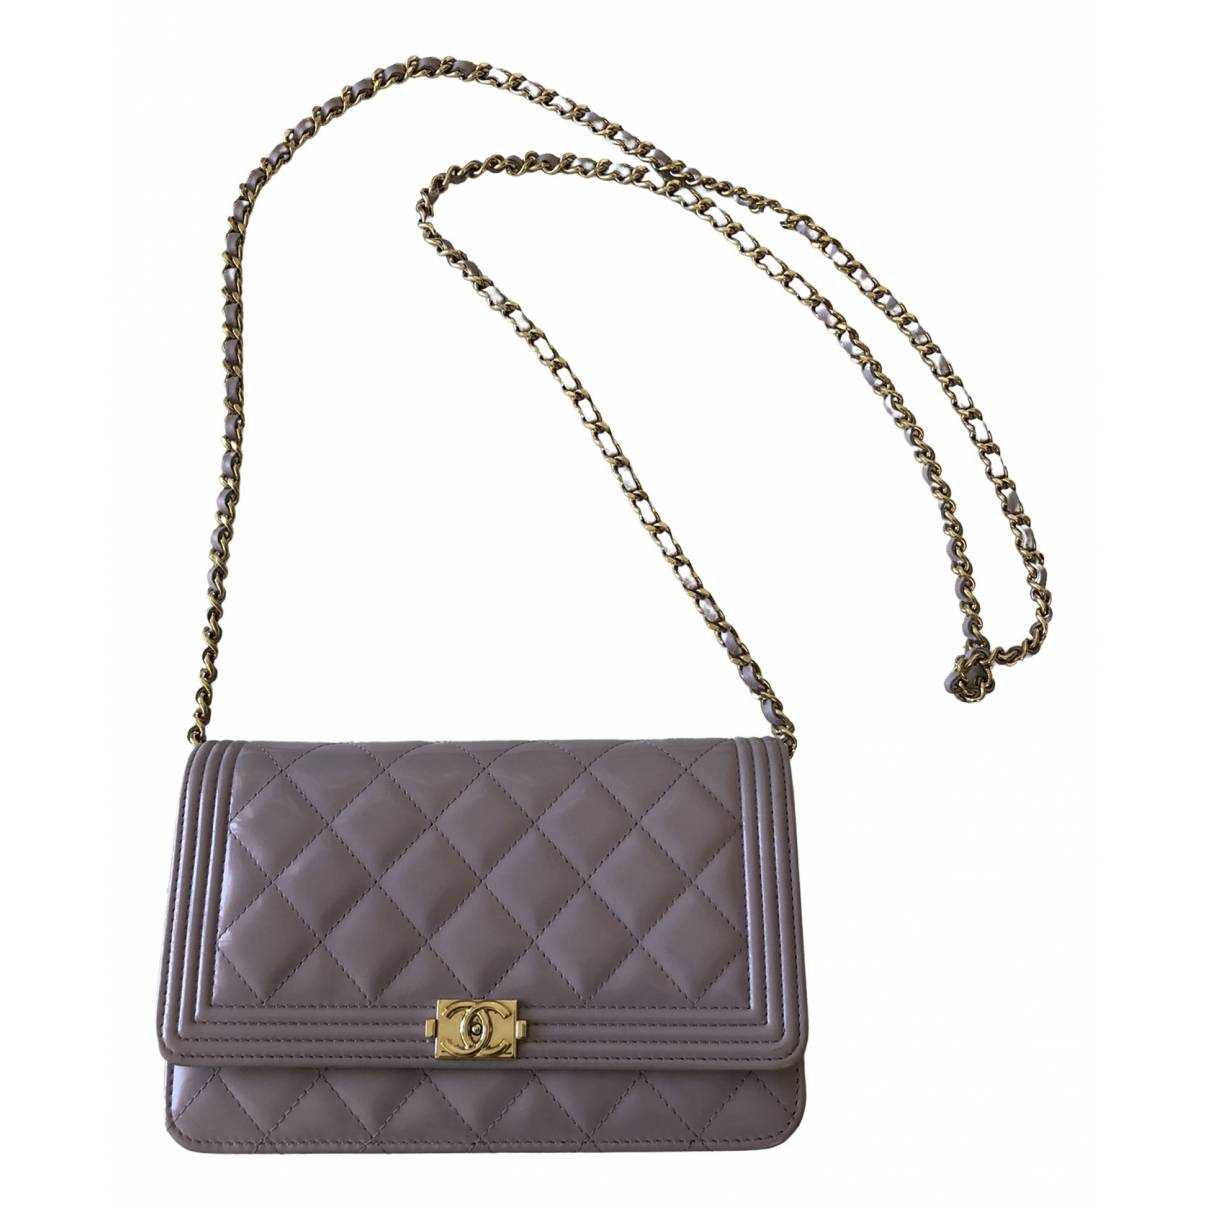 Chanel - Authenticated Wallet on Chain Boy Half Flap Handbag - Patent Leather Purple Plain for Women, Very Good Condition